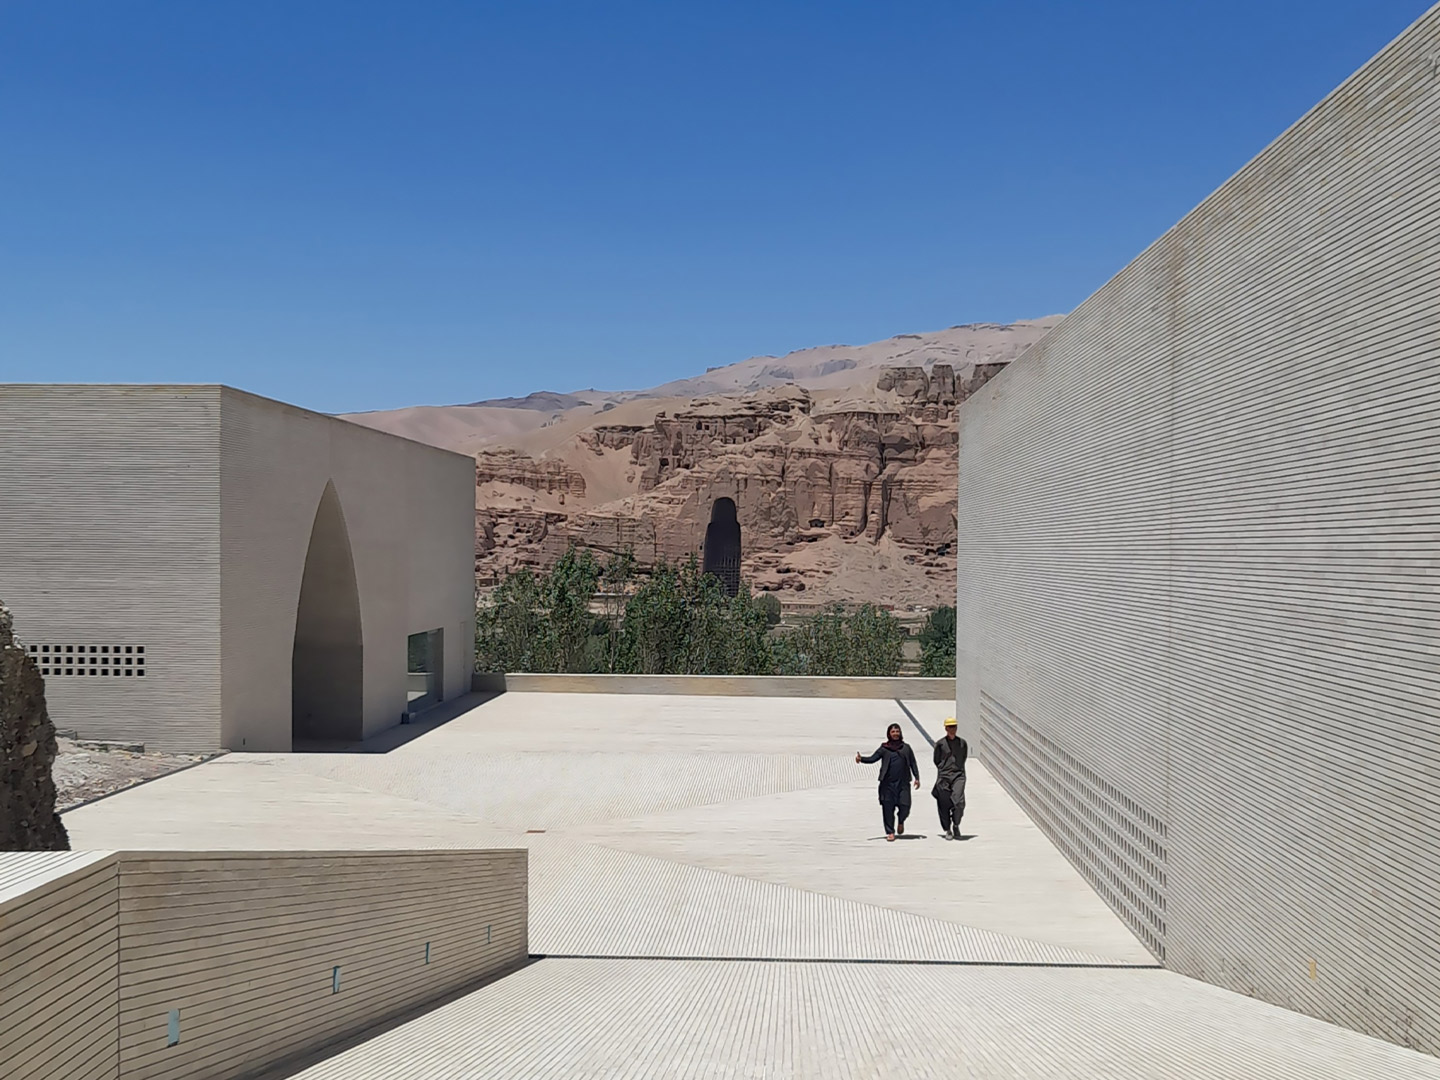 Bamiyan / Bamyan Cultural Centre in Afghanistan by M2R Arquitectos